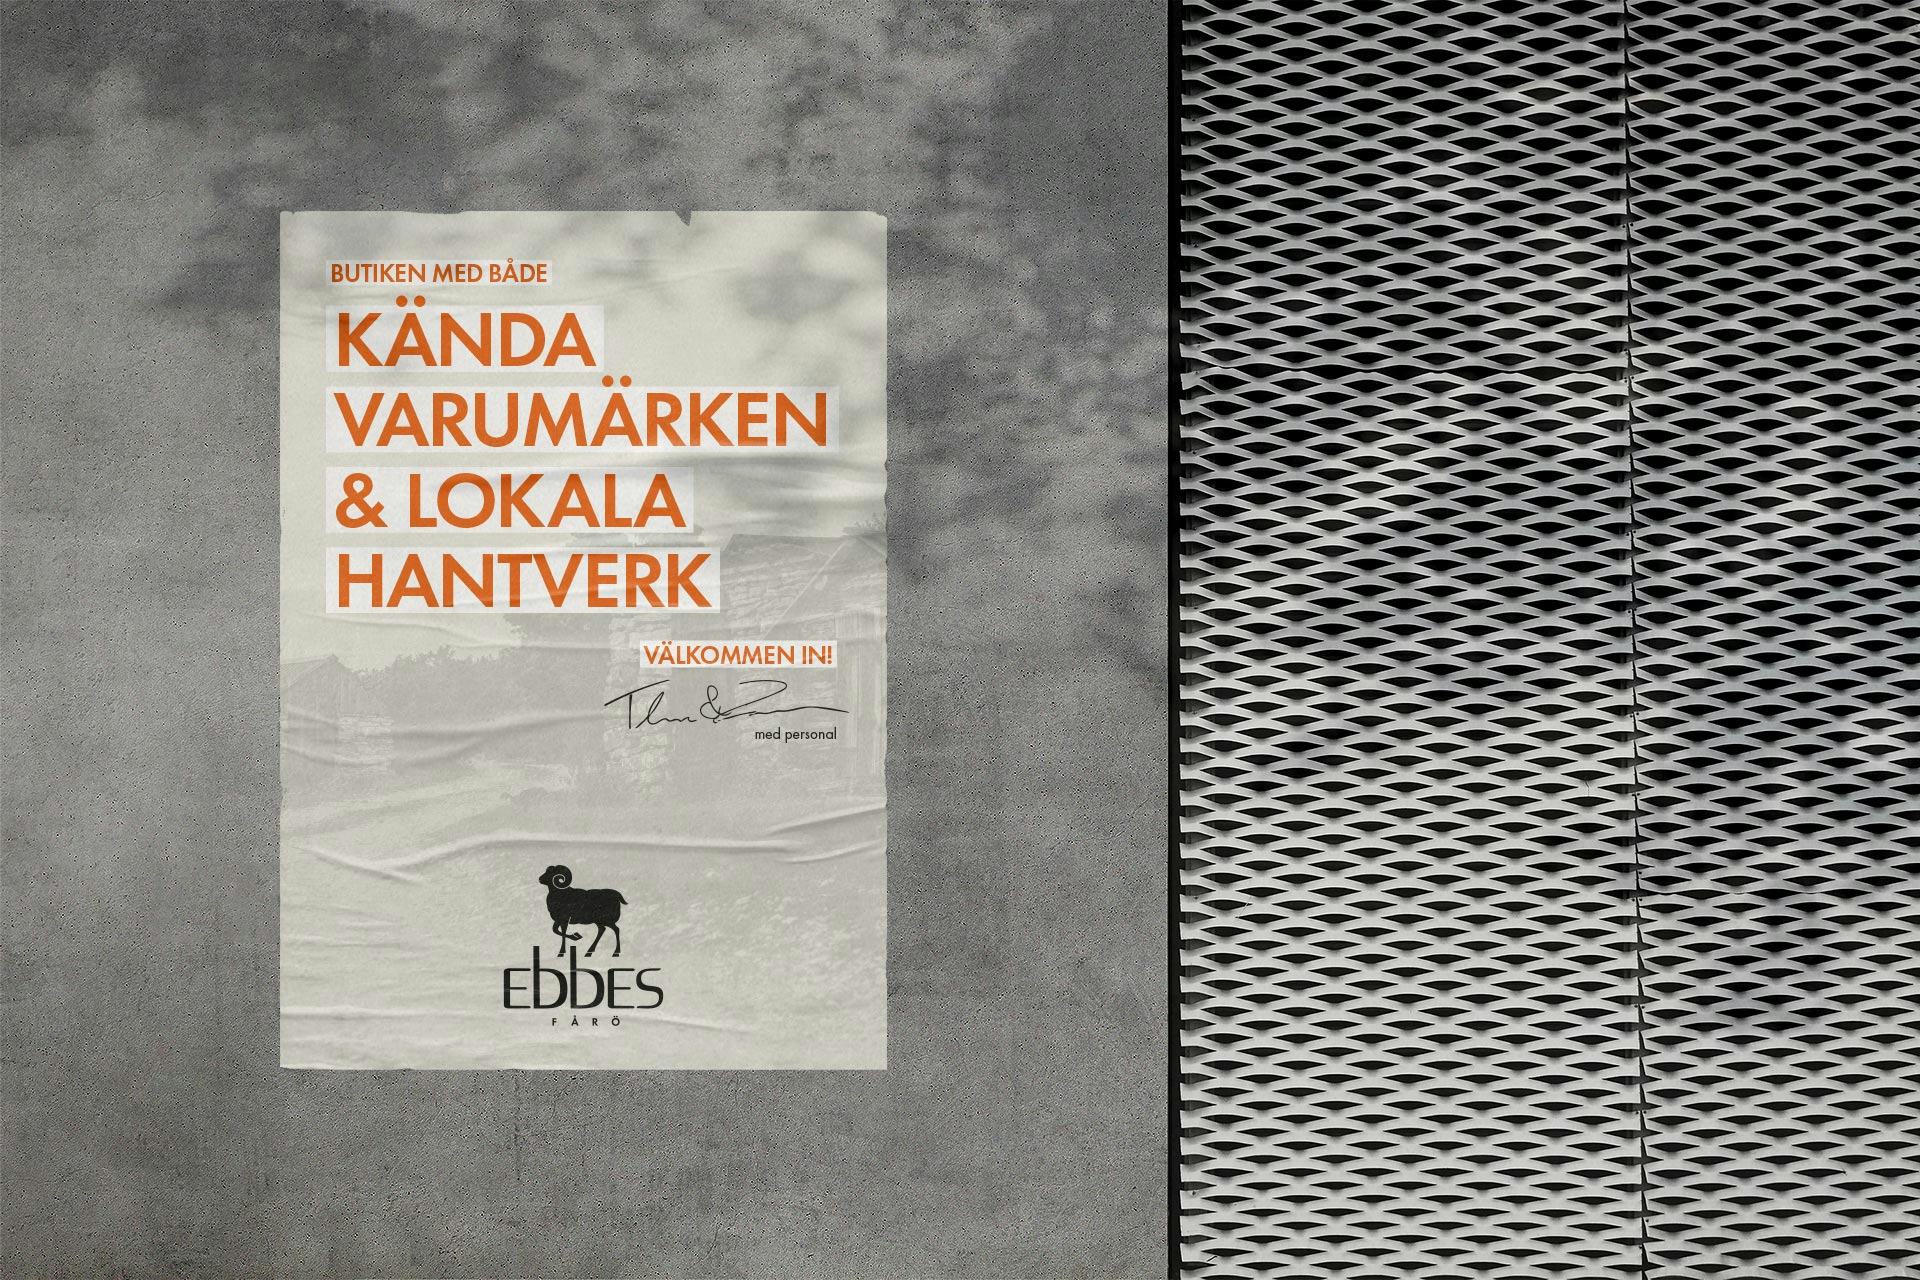 A beige poster with orange text in Swedish glued on a grey concrete wall